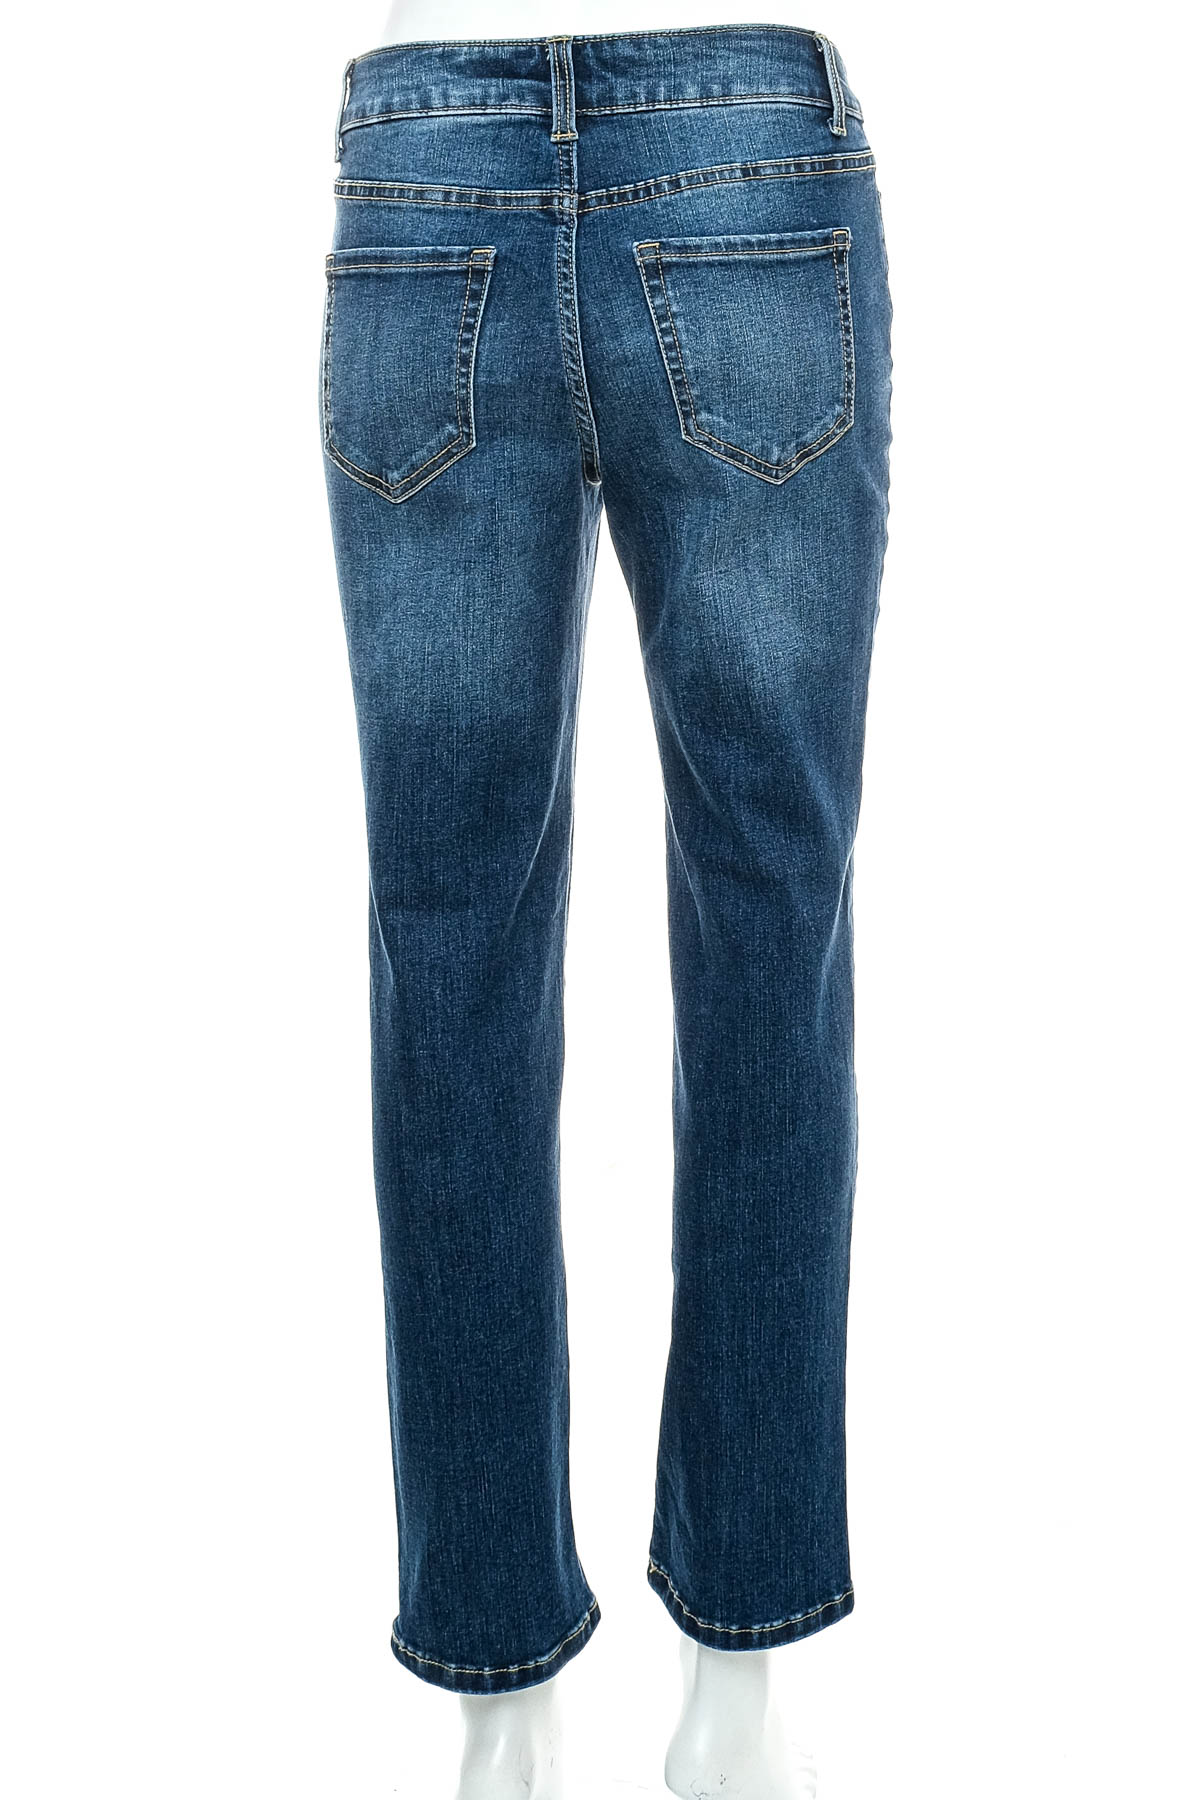 Women's jeans - TIME and TRU - 1